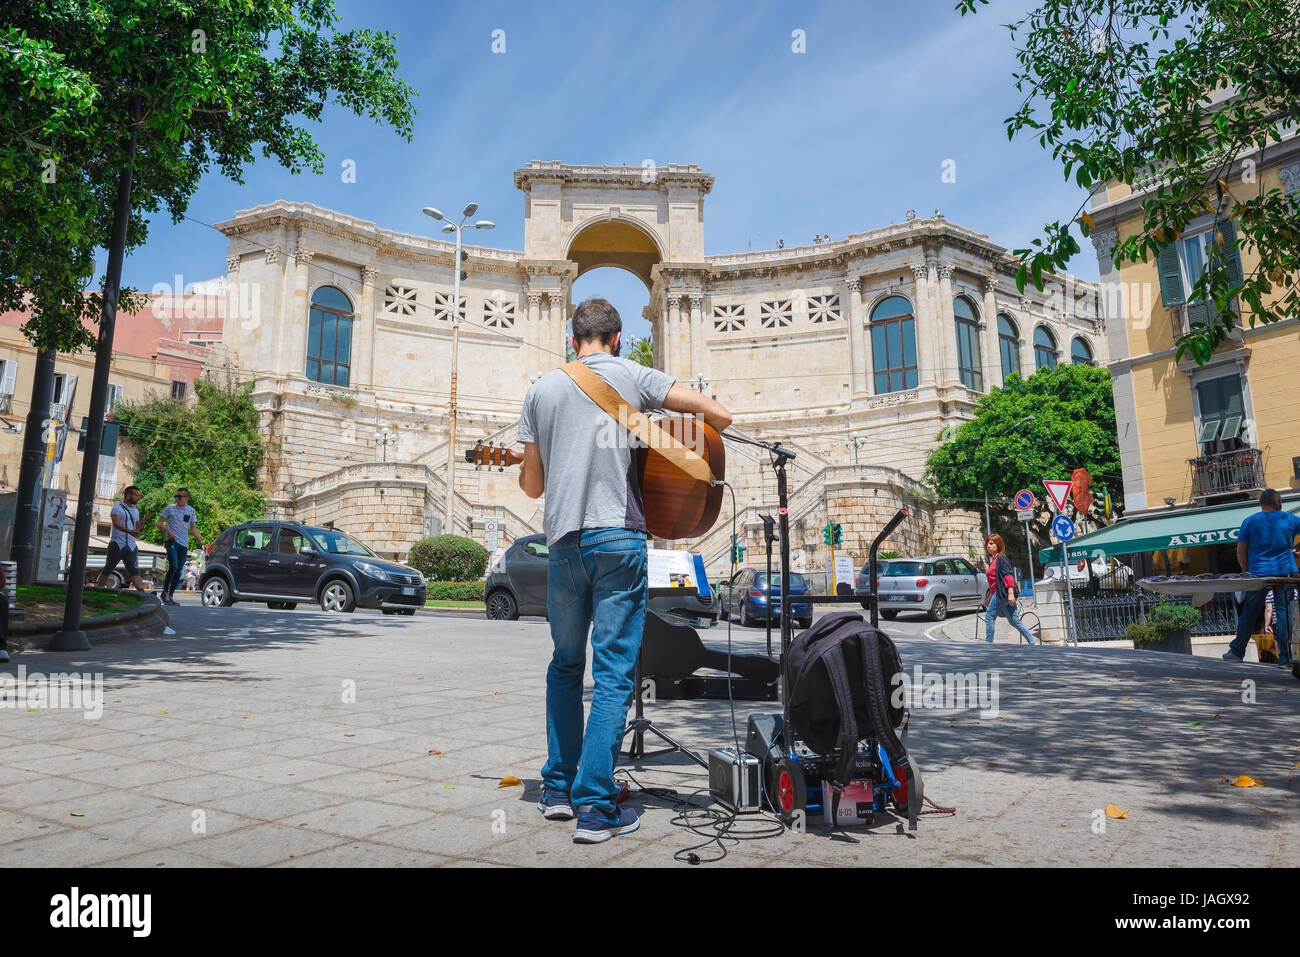 A busker plays his guitar in the Piazza Emanuele Ravot in the center of Cagliari, Sardinia. Stock Photo